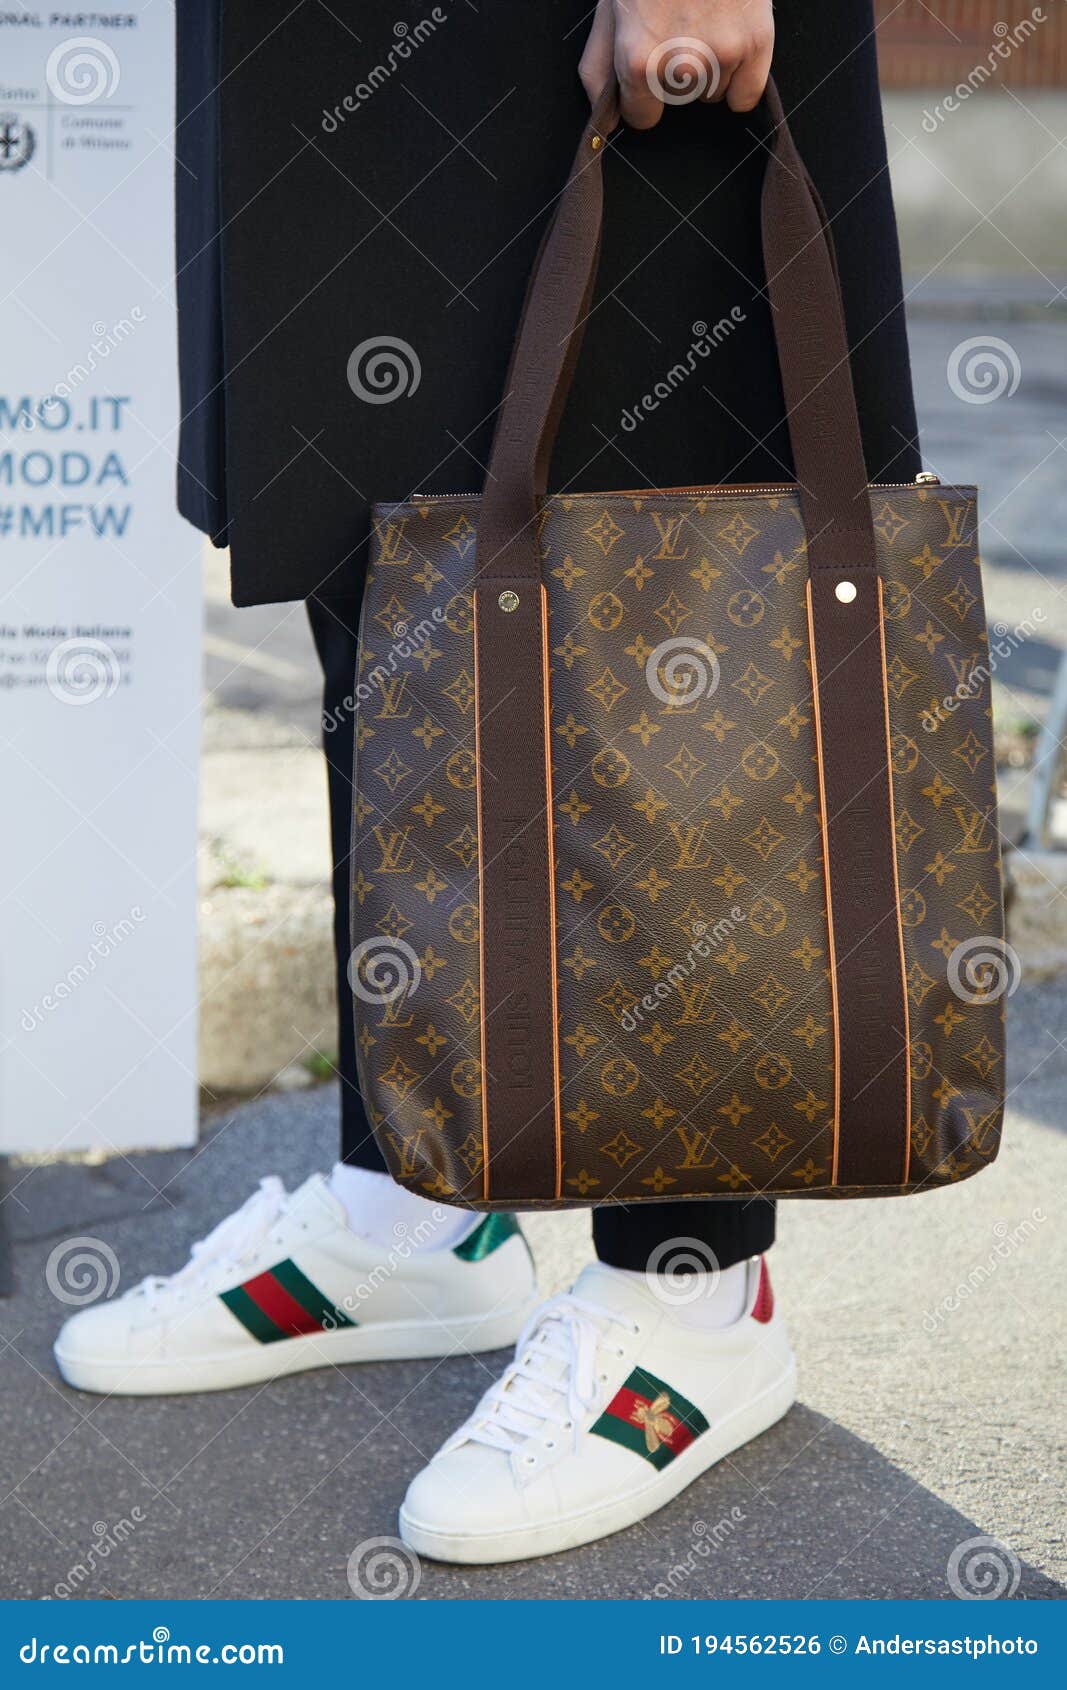 Man with Louis Vuitton Bag and White Gucci Shoes before Diesel